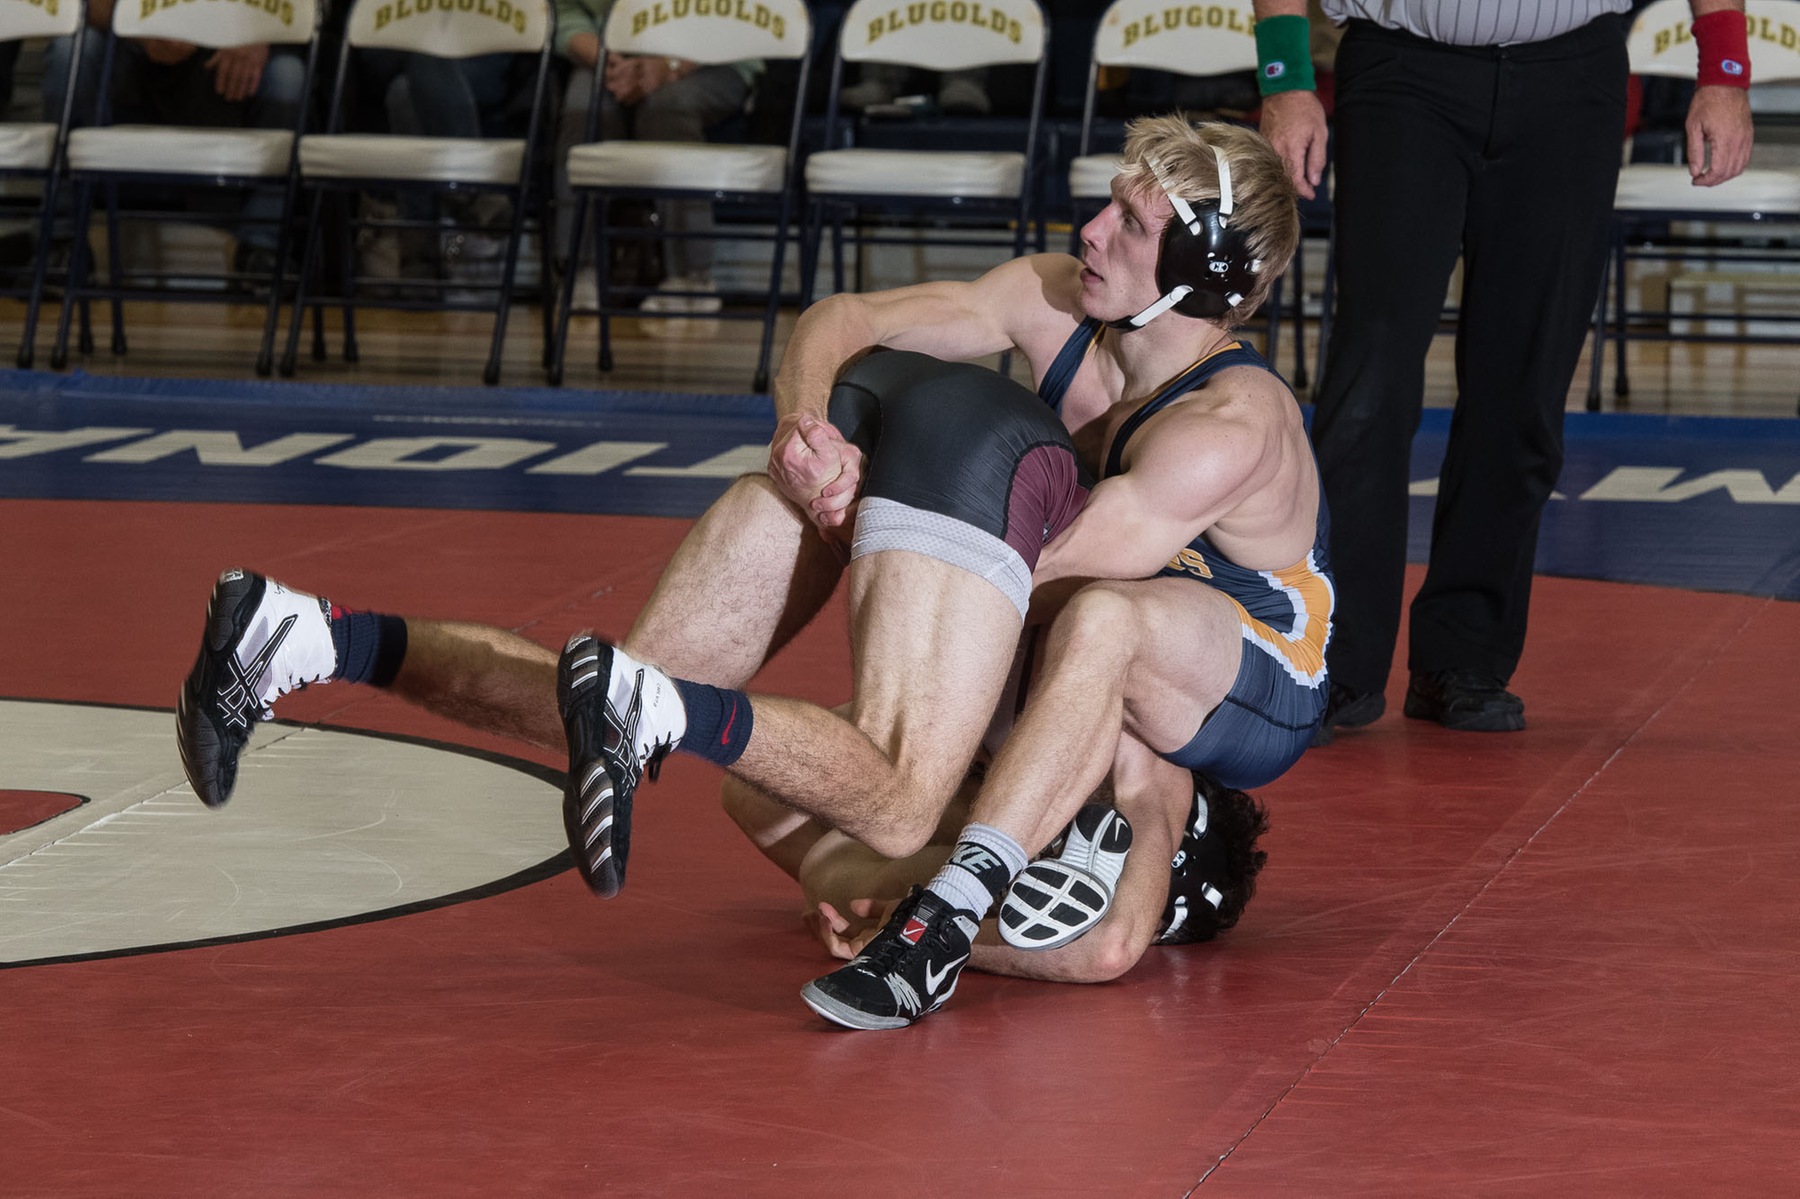 Blugolds dominate Oles in first road dual test